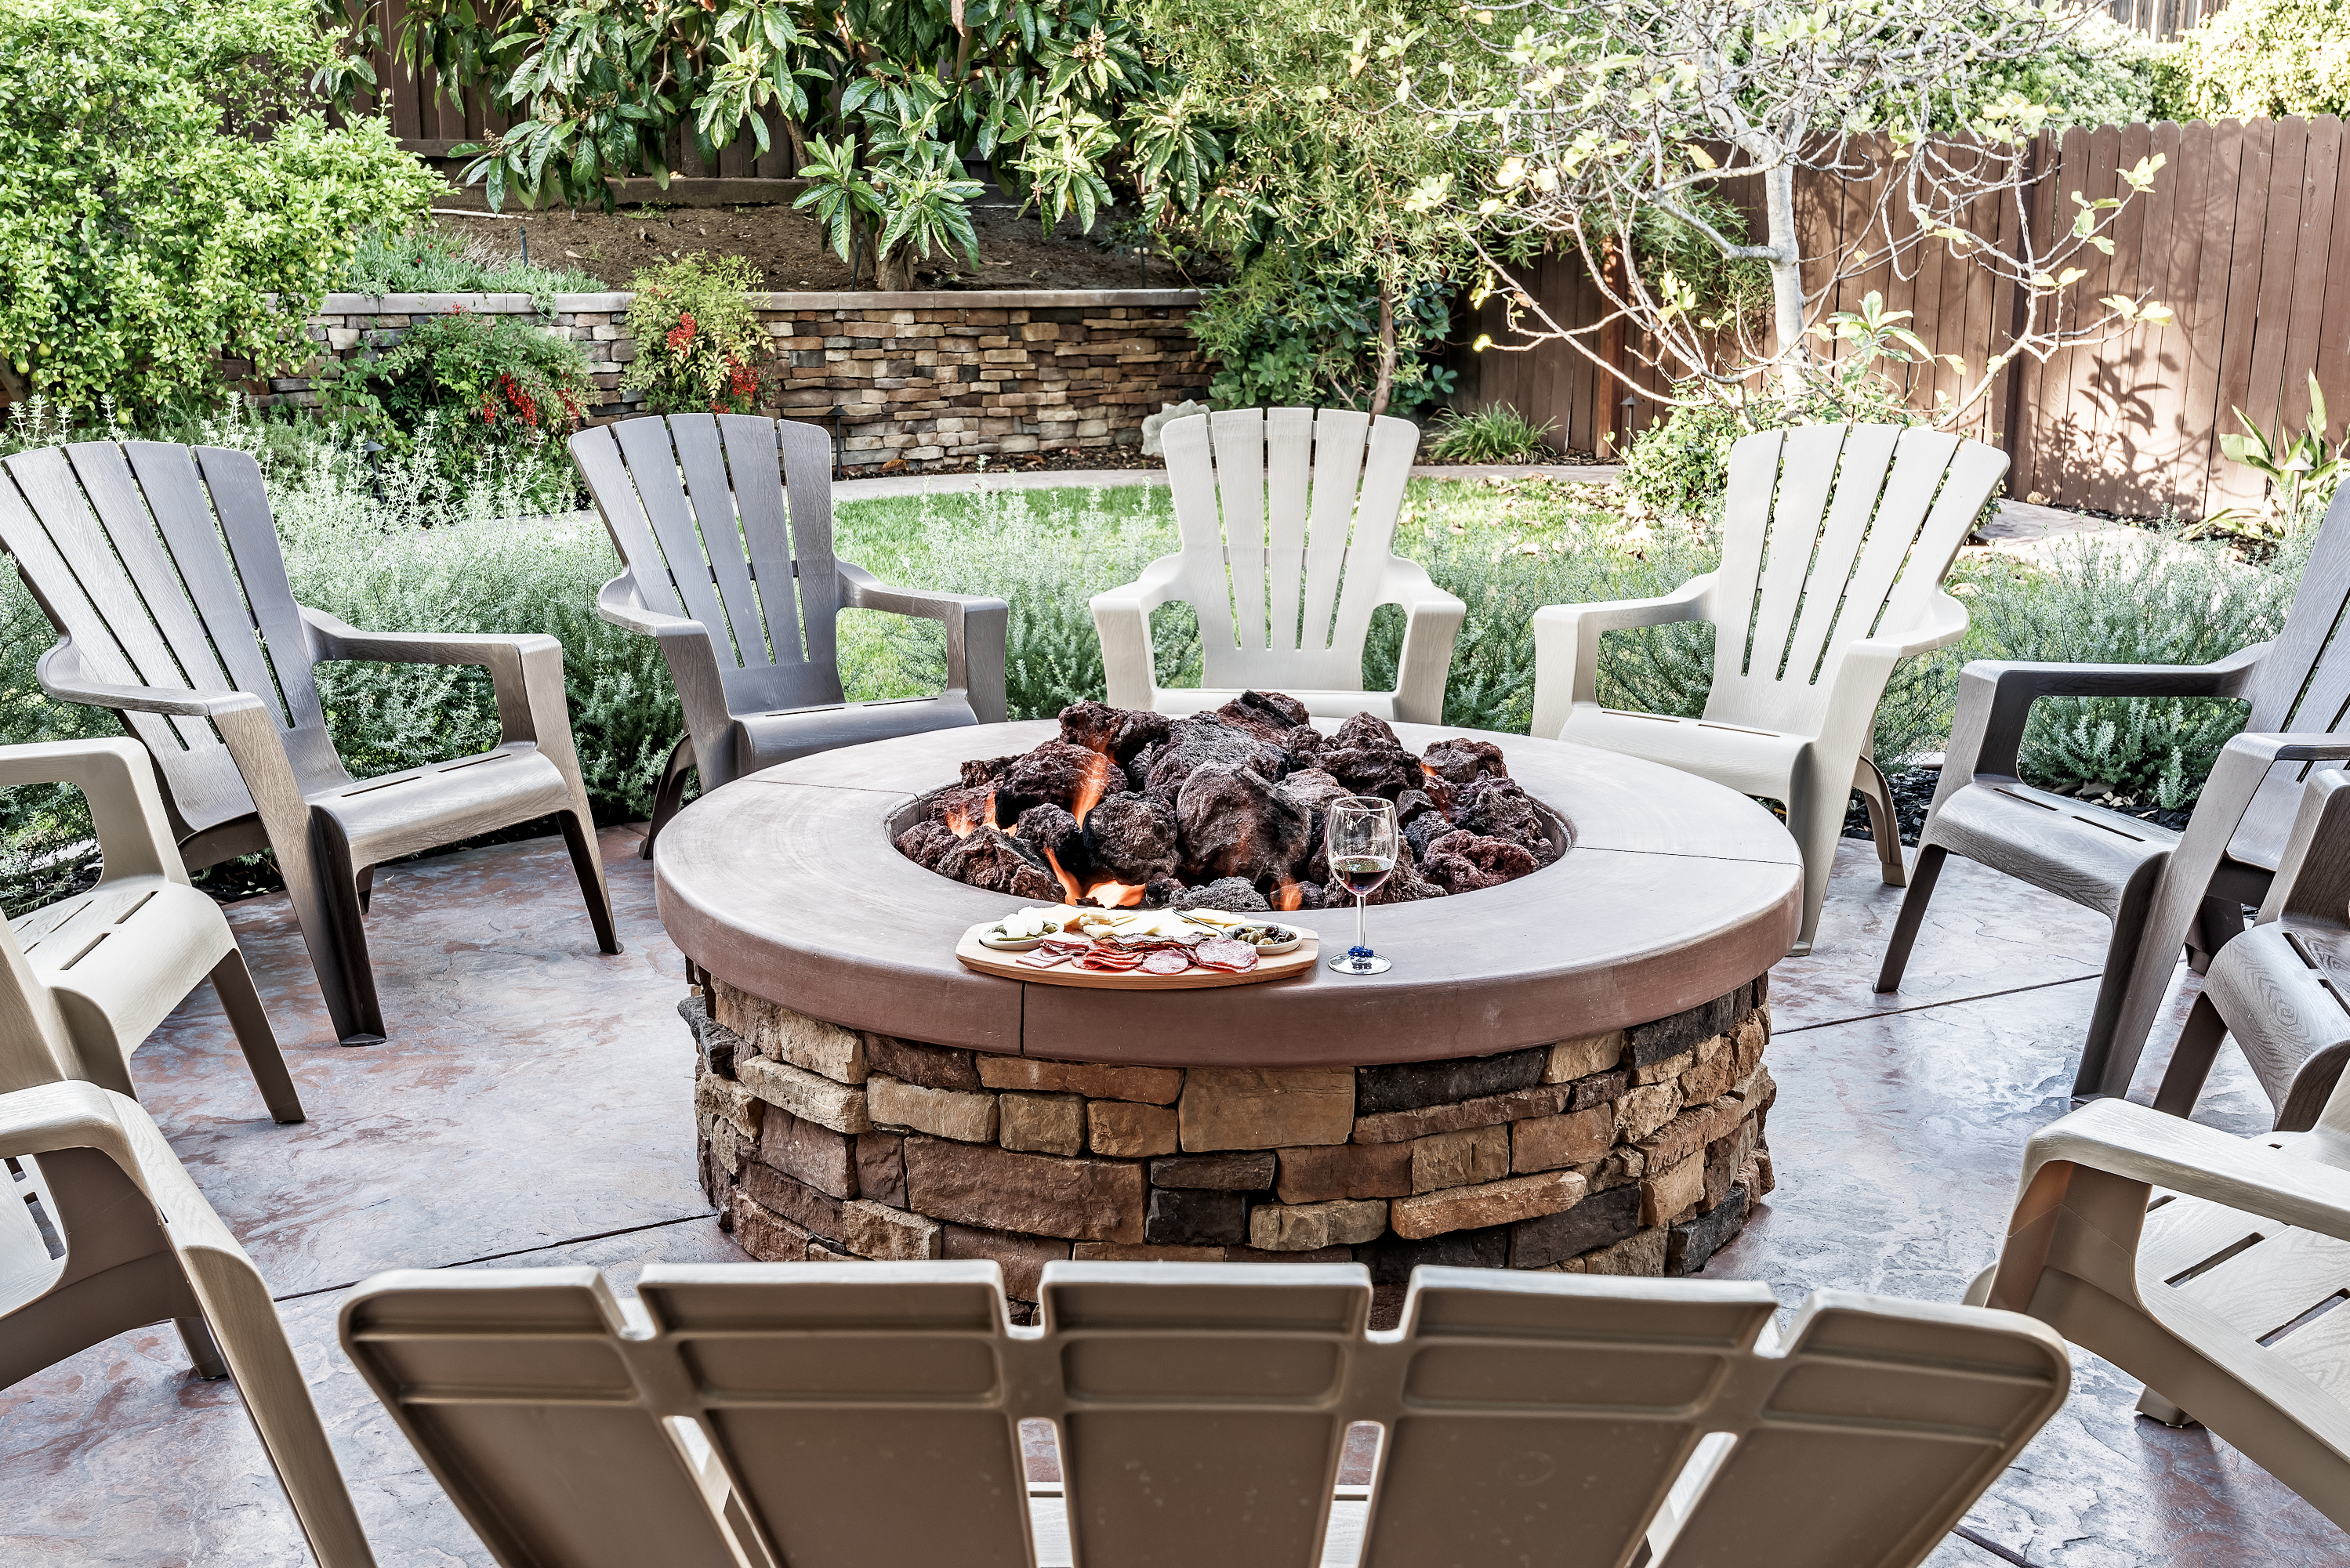 Outdoor Fire Pit Worth The Investment, Backyard Fire Pit Cost